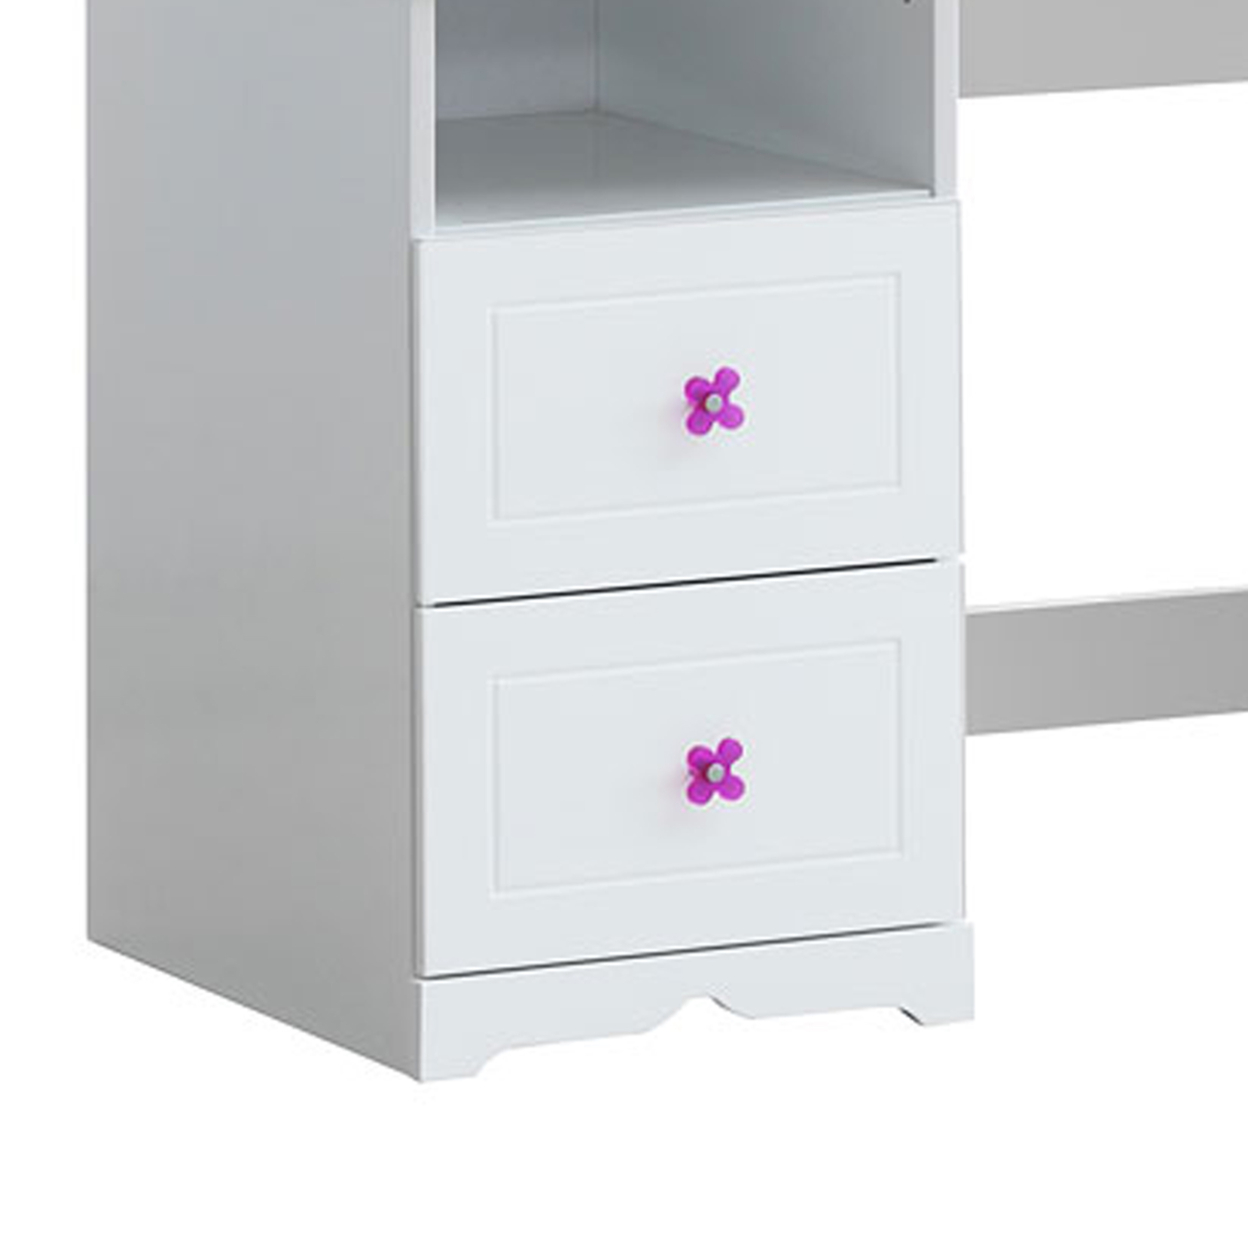 Wooden Table Desk With 2 Drawers And 1 Open Compartment, White- Saltoro Sherpi